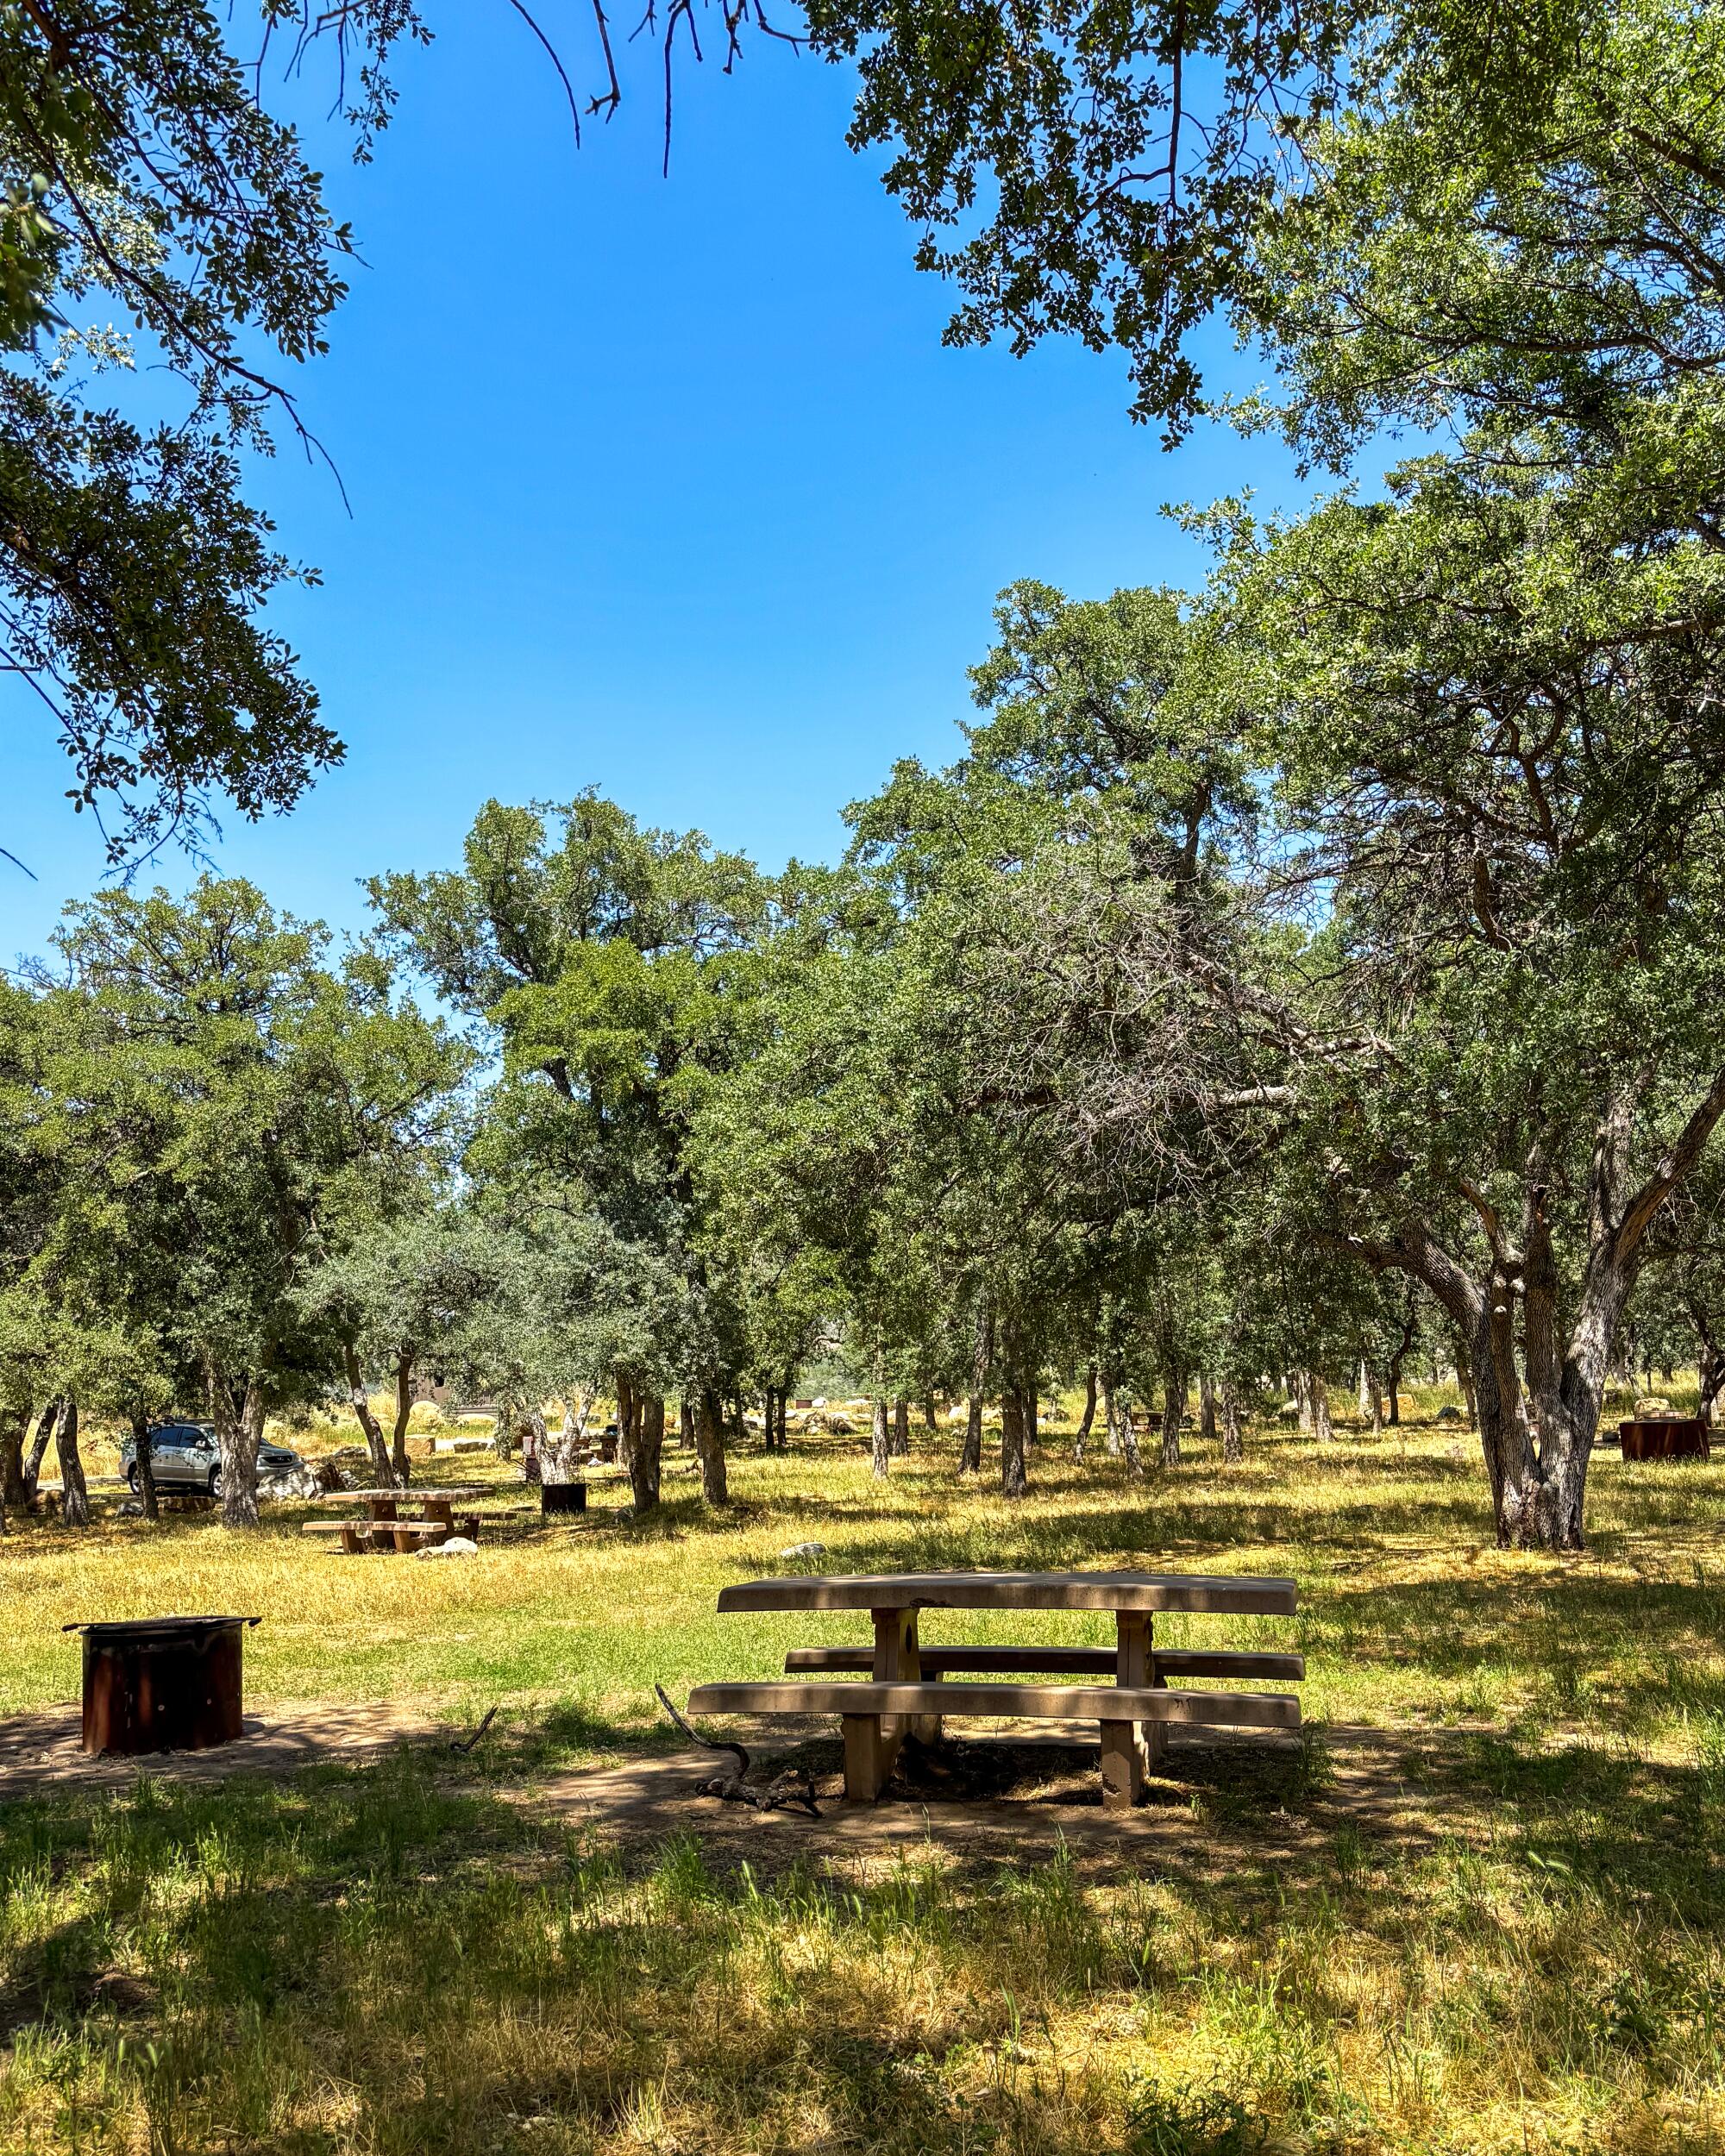 A picnic table and campfire ring in a meadow in a campground